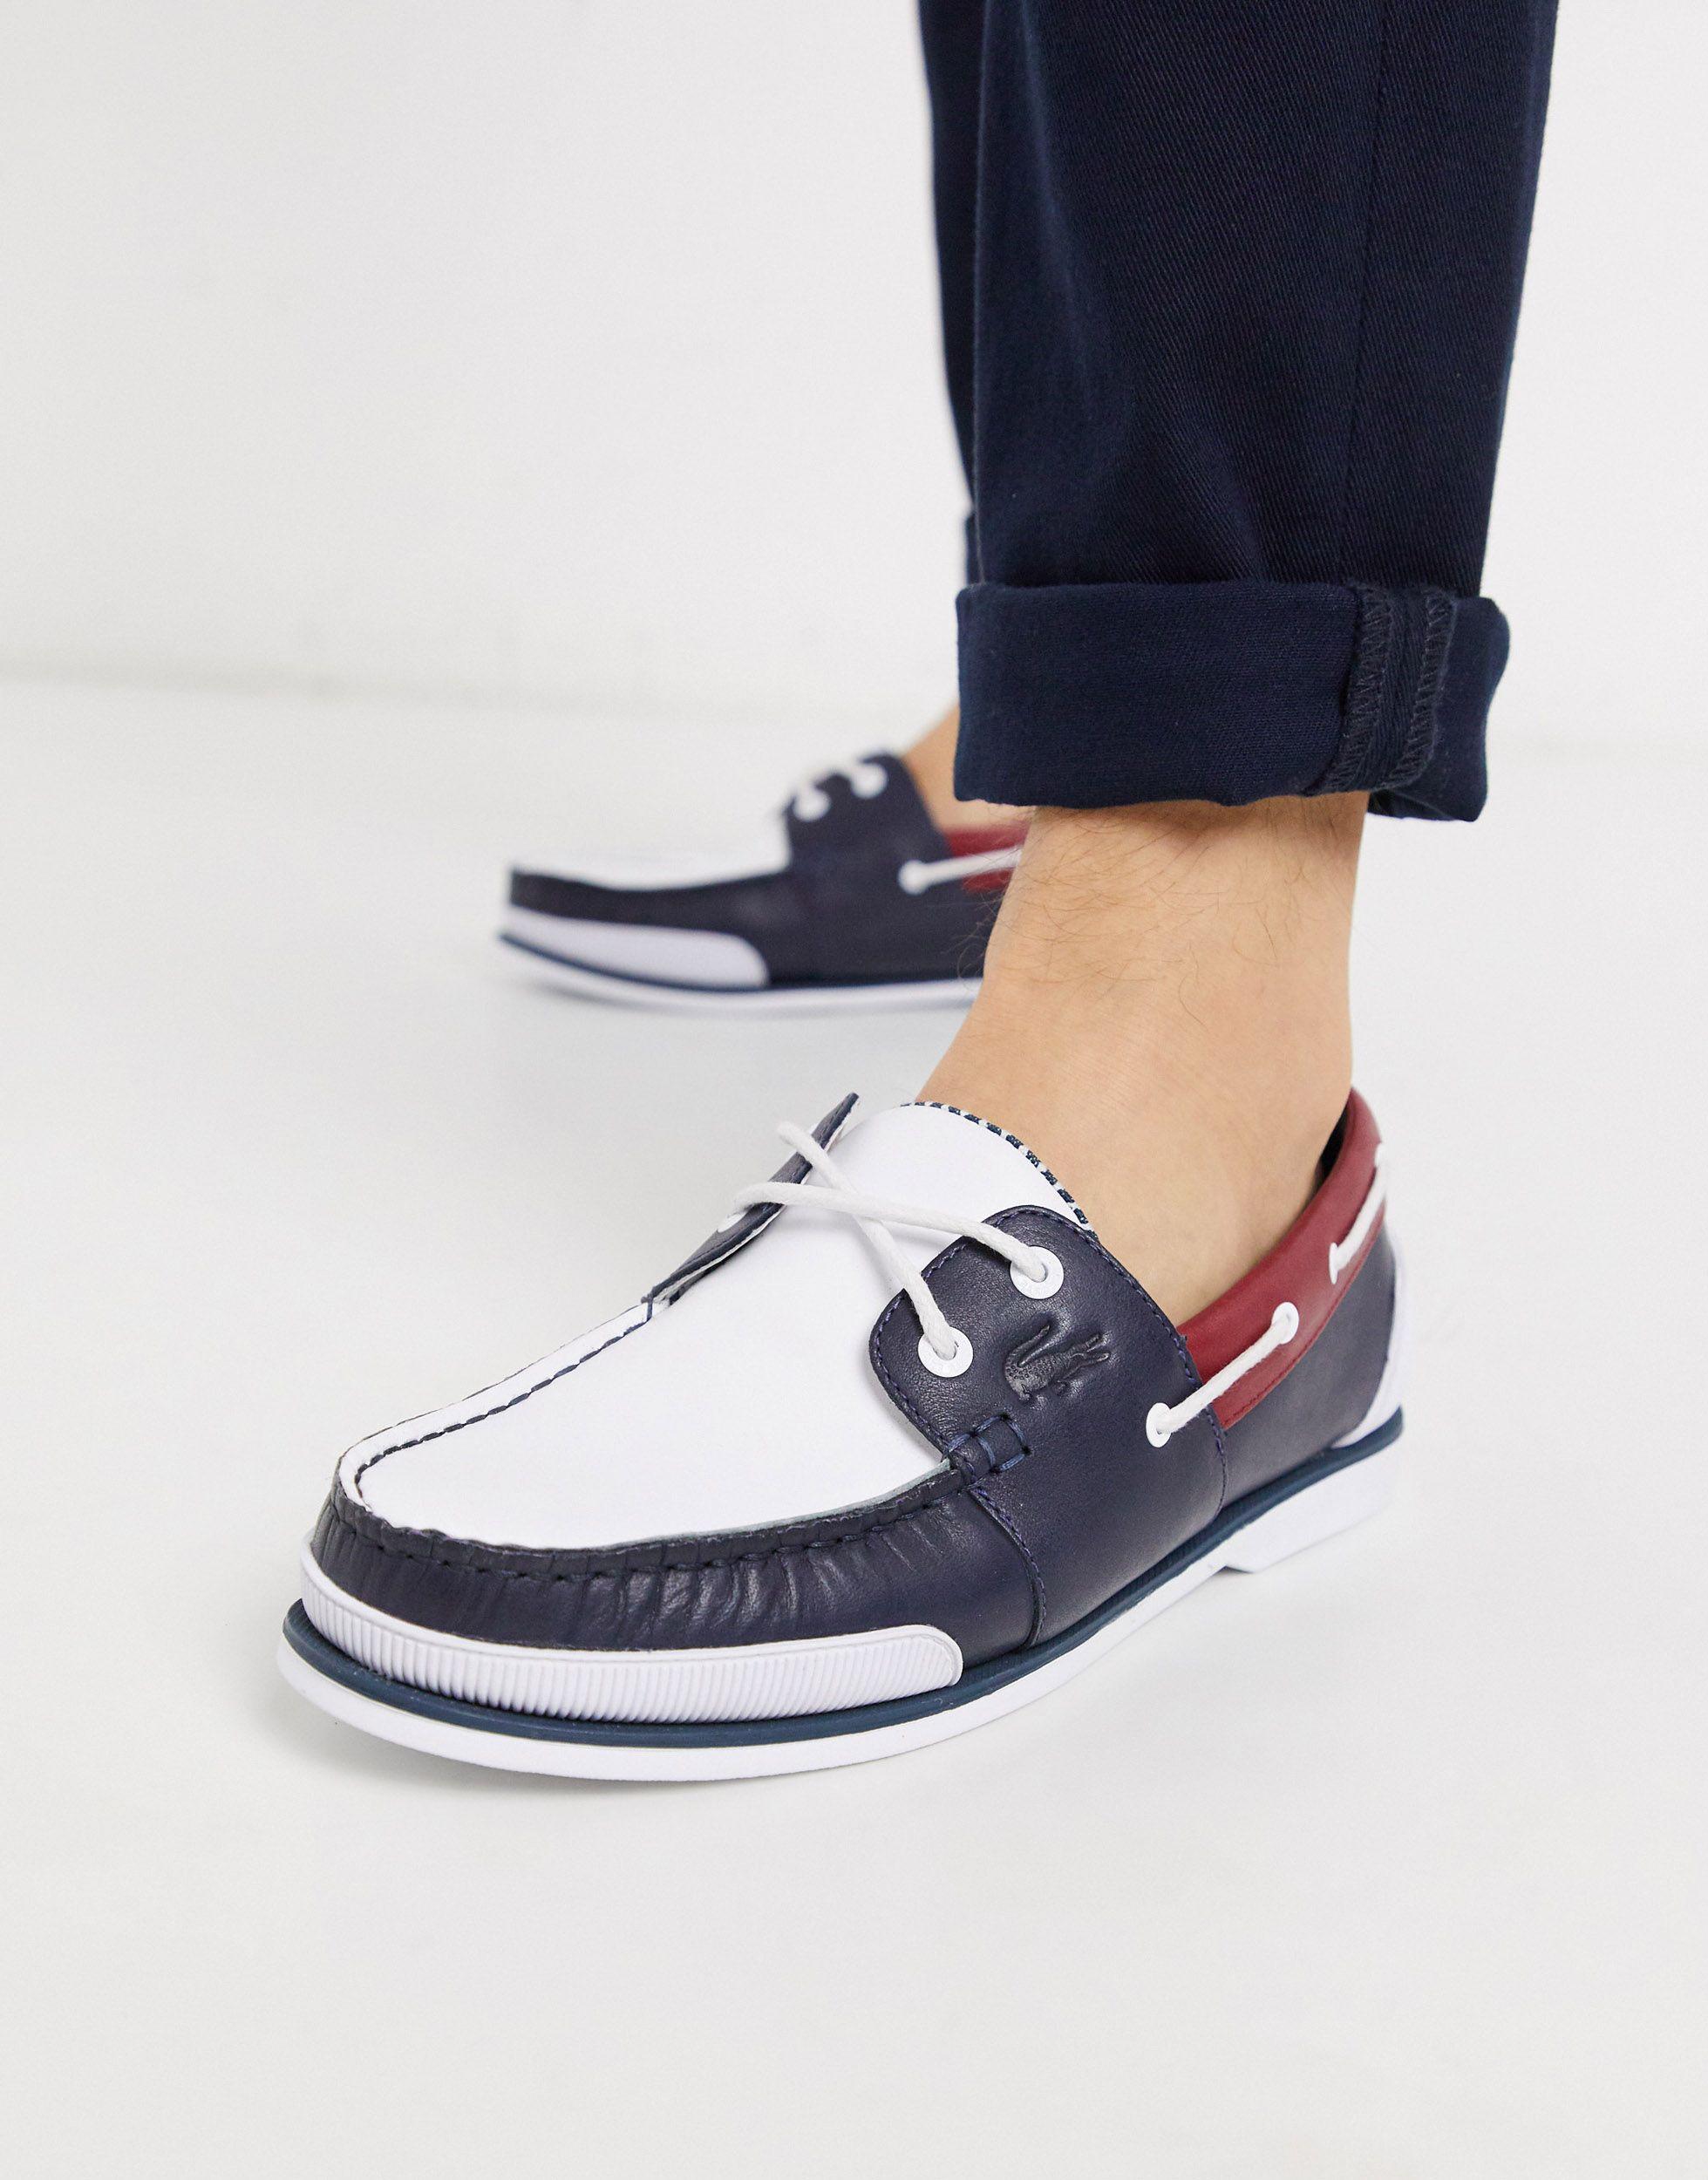 Lacoste Nautic Boat Shoes Tricolore Leather in for Men - Lyst